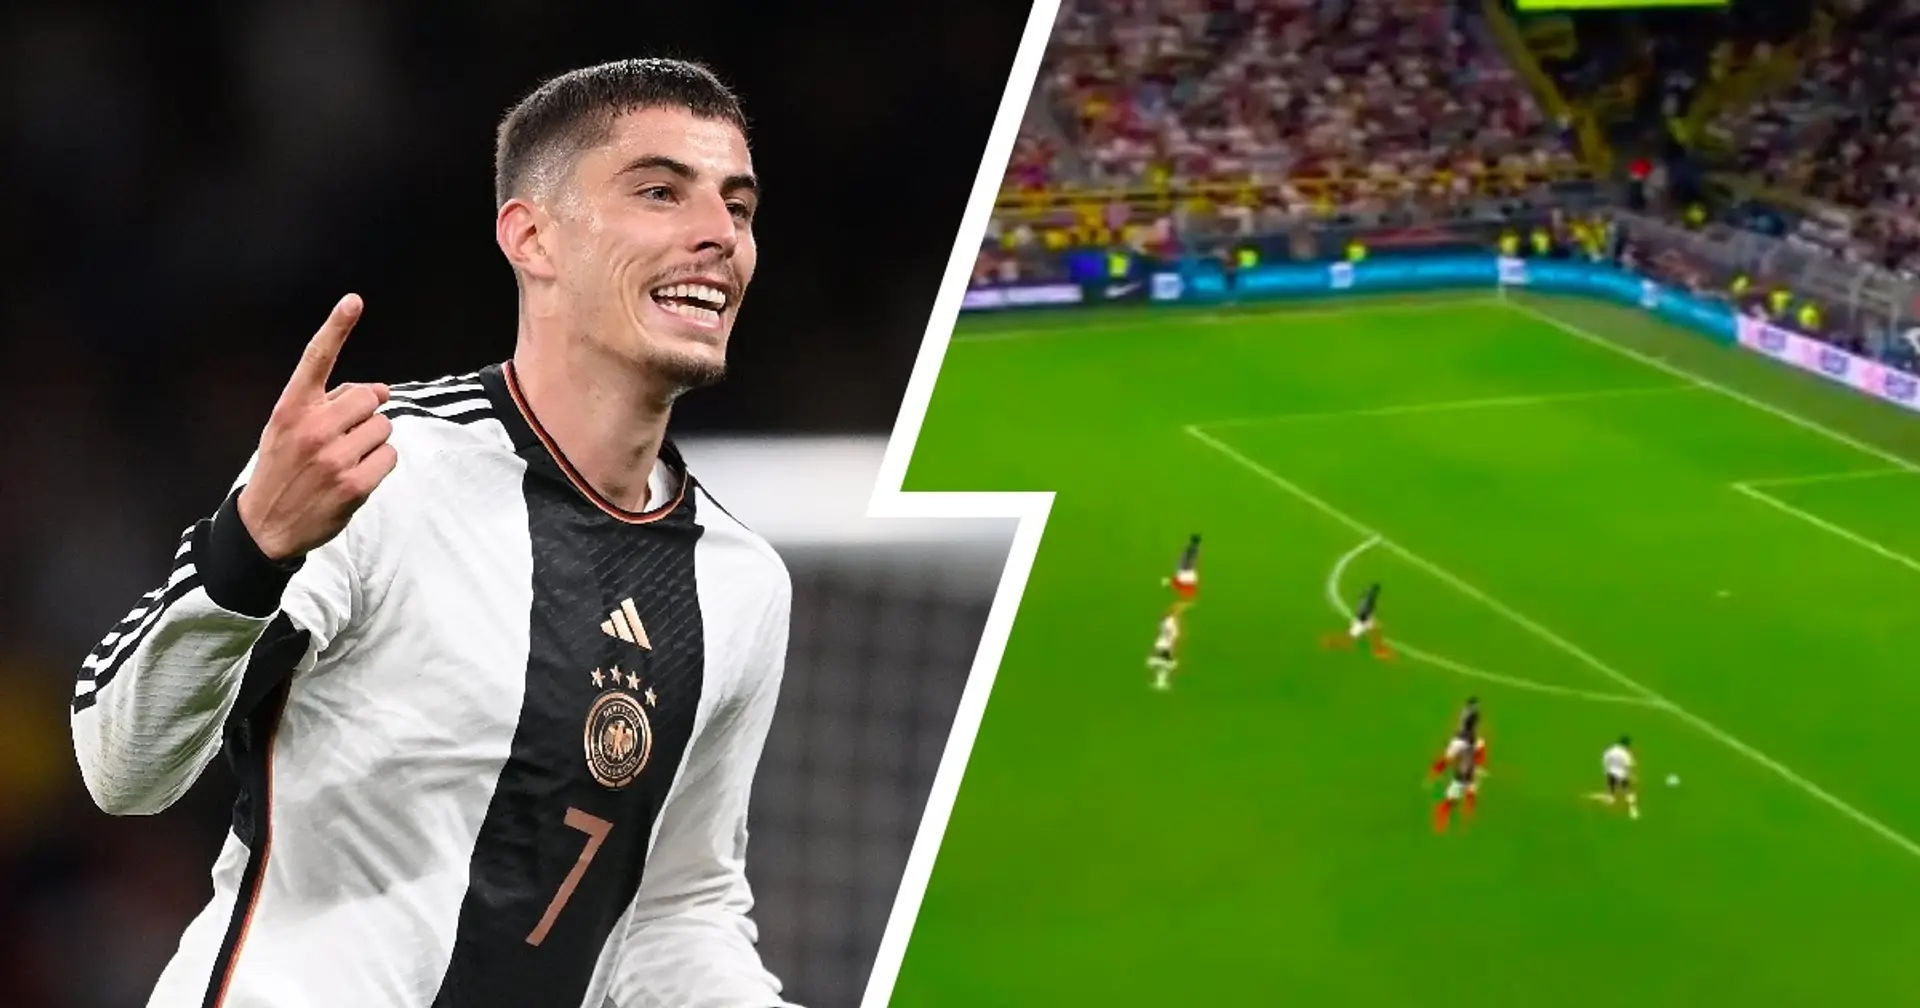 SPOTTED: Kai Havertz provides sublime assist for Germany teammate